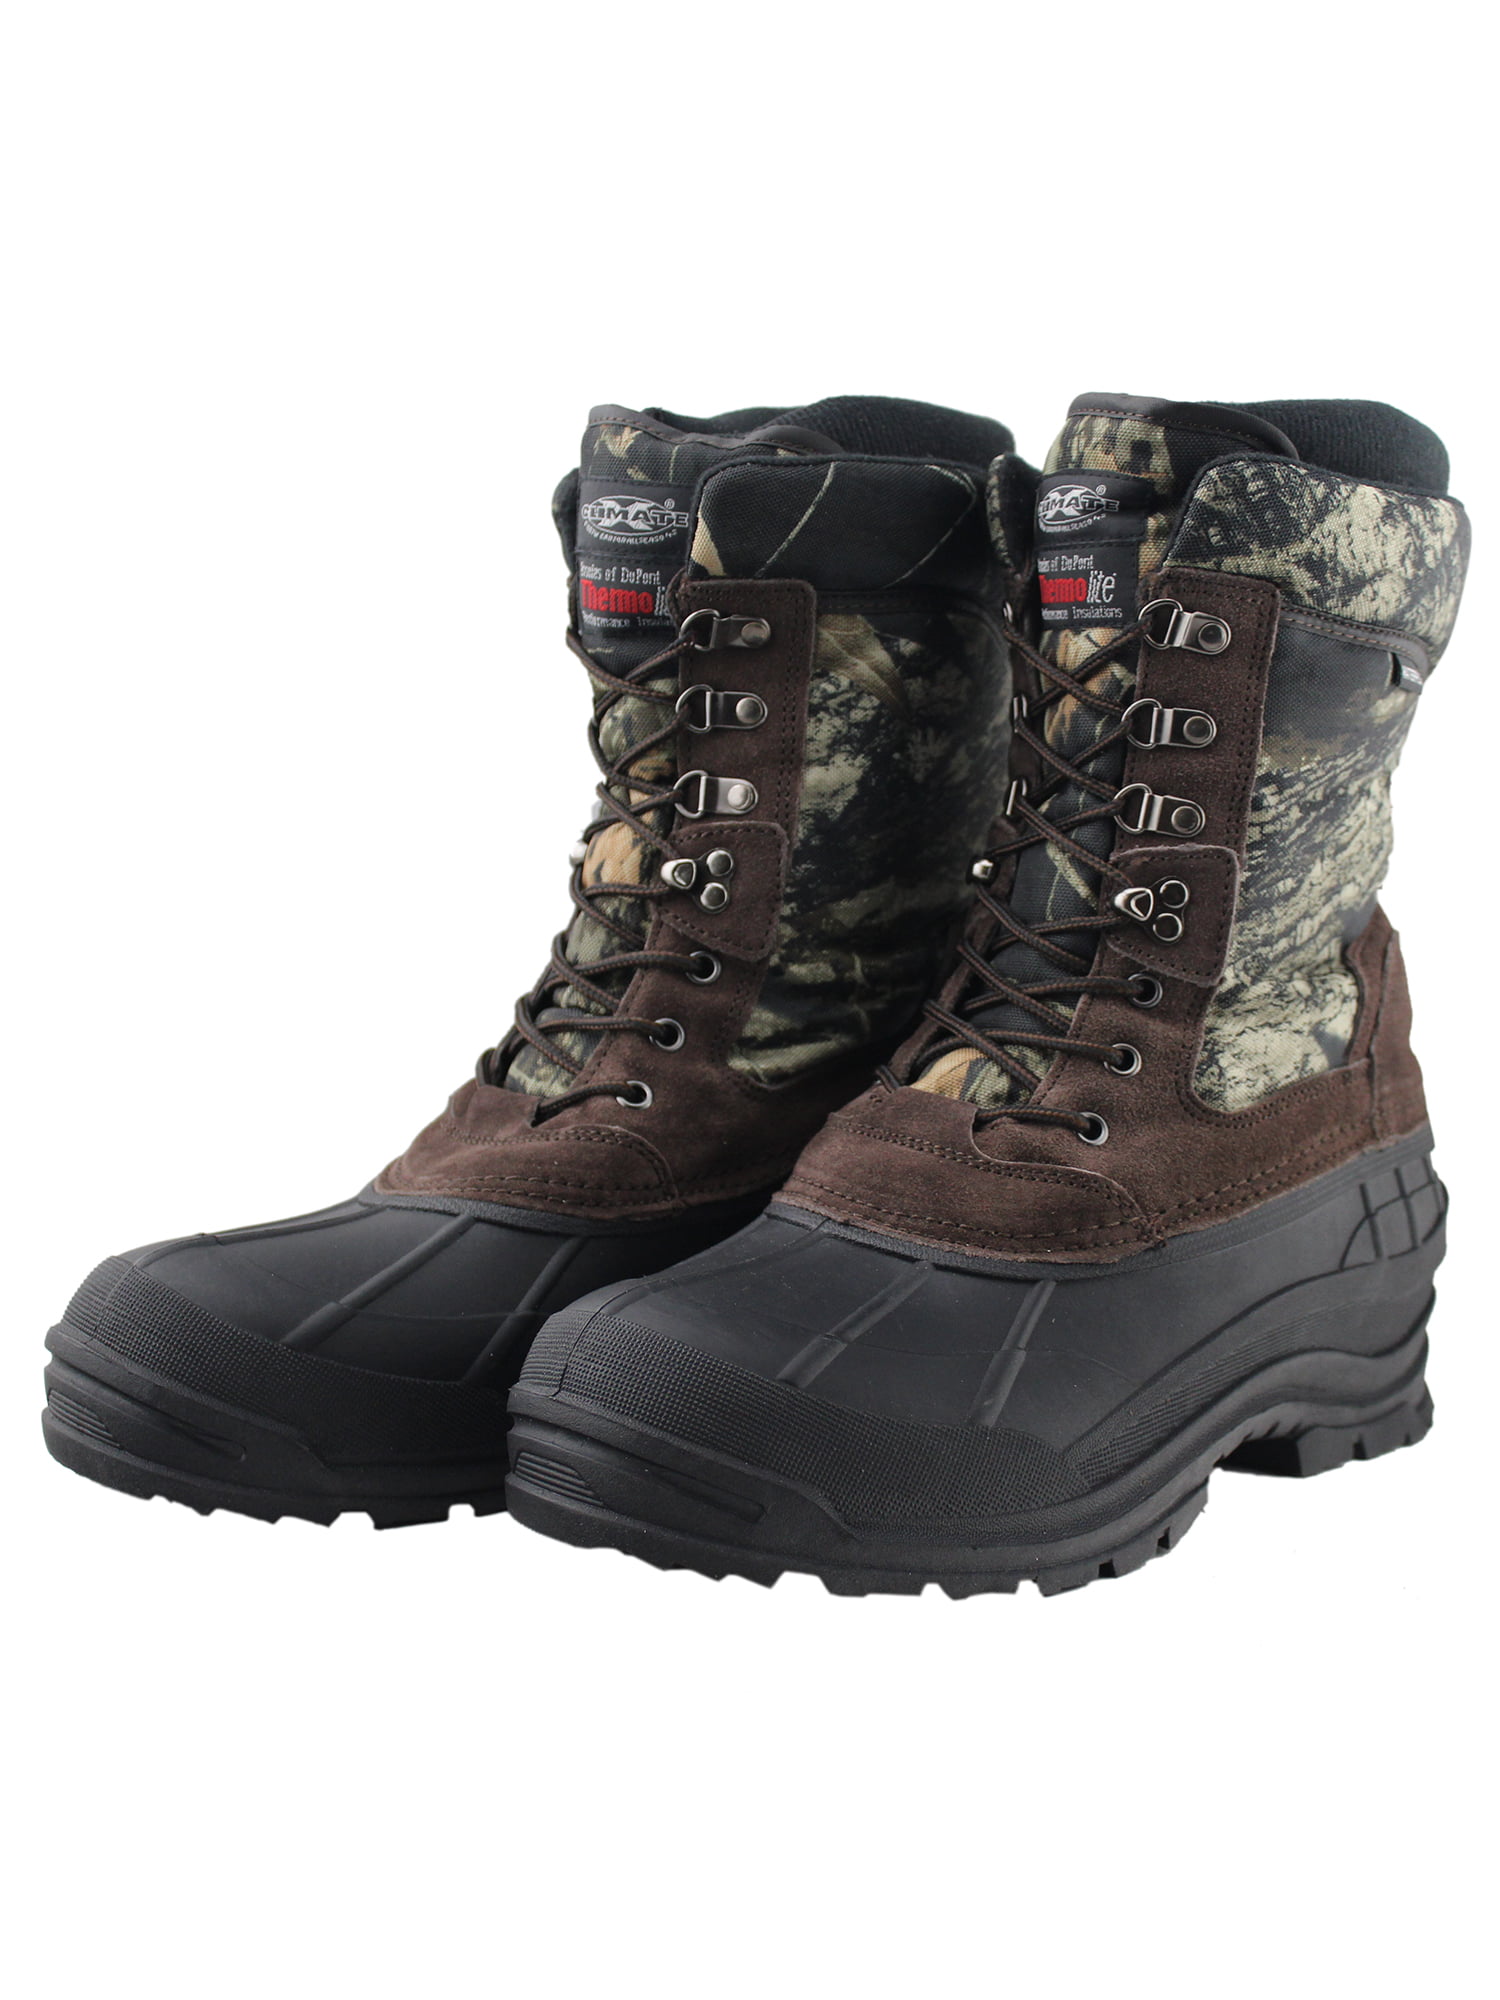 Womens Mens Waterproof Camouflage Warm Snow Boots Thicken Winter Shoes Plus Size 